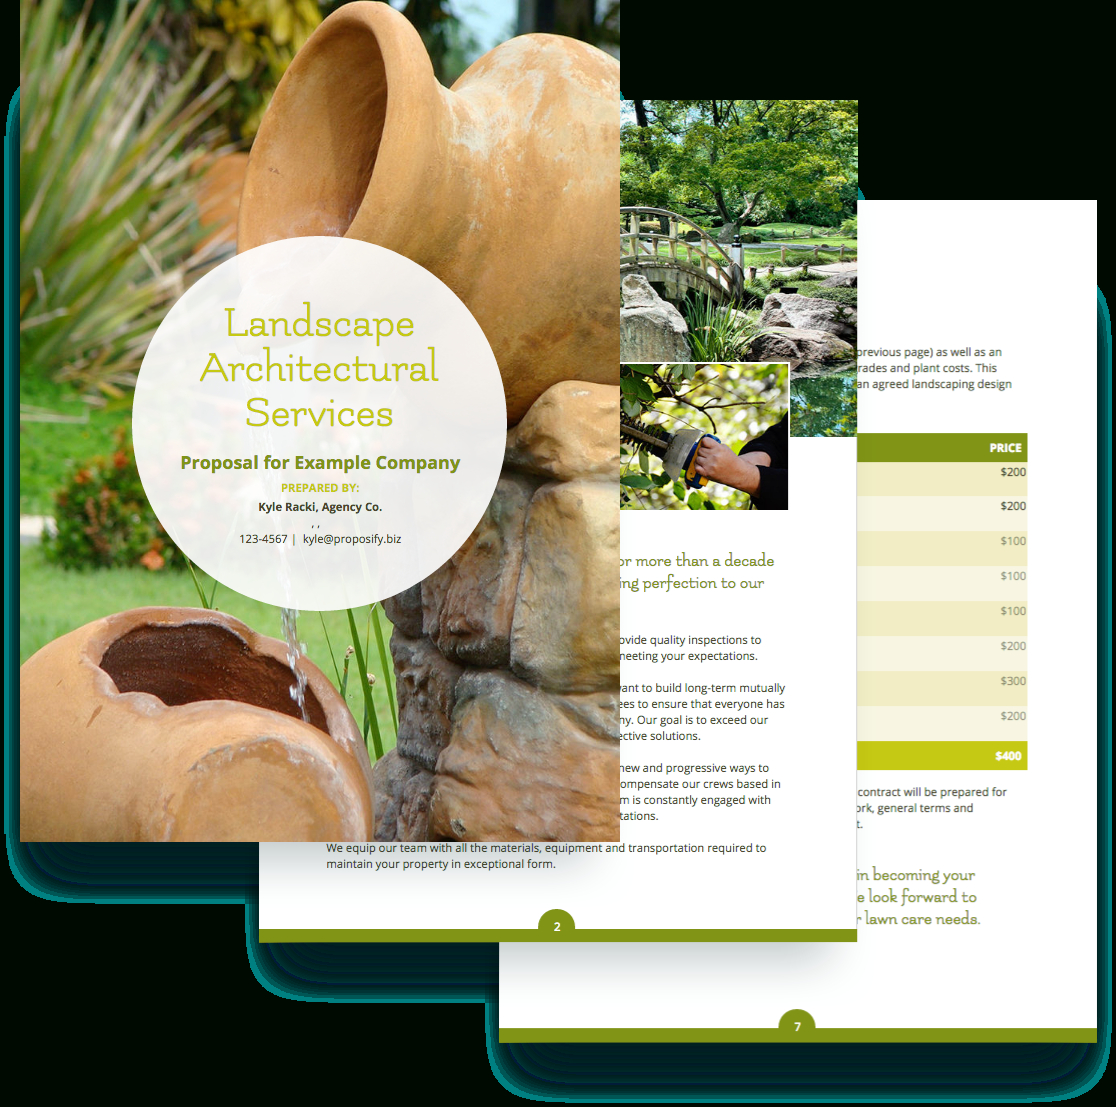 Landscaping Proposal Template - Free Sample | Proposify Pertaining To Landscape Proposal Template